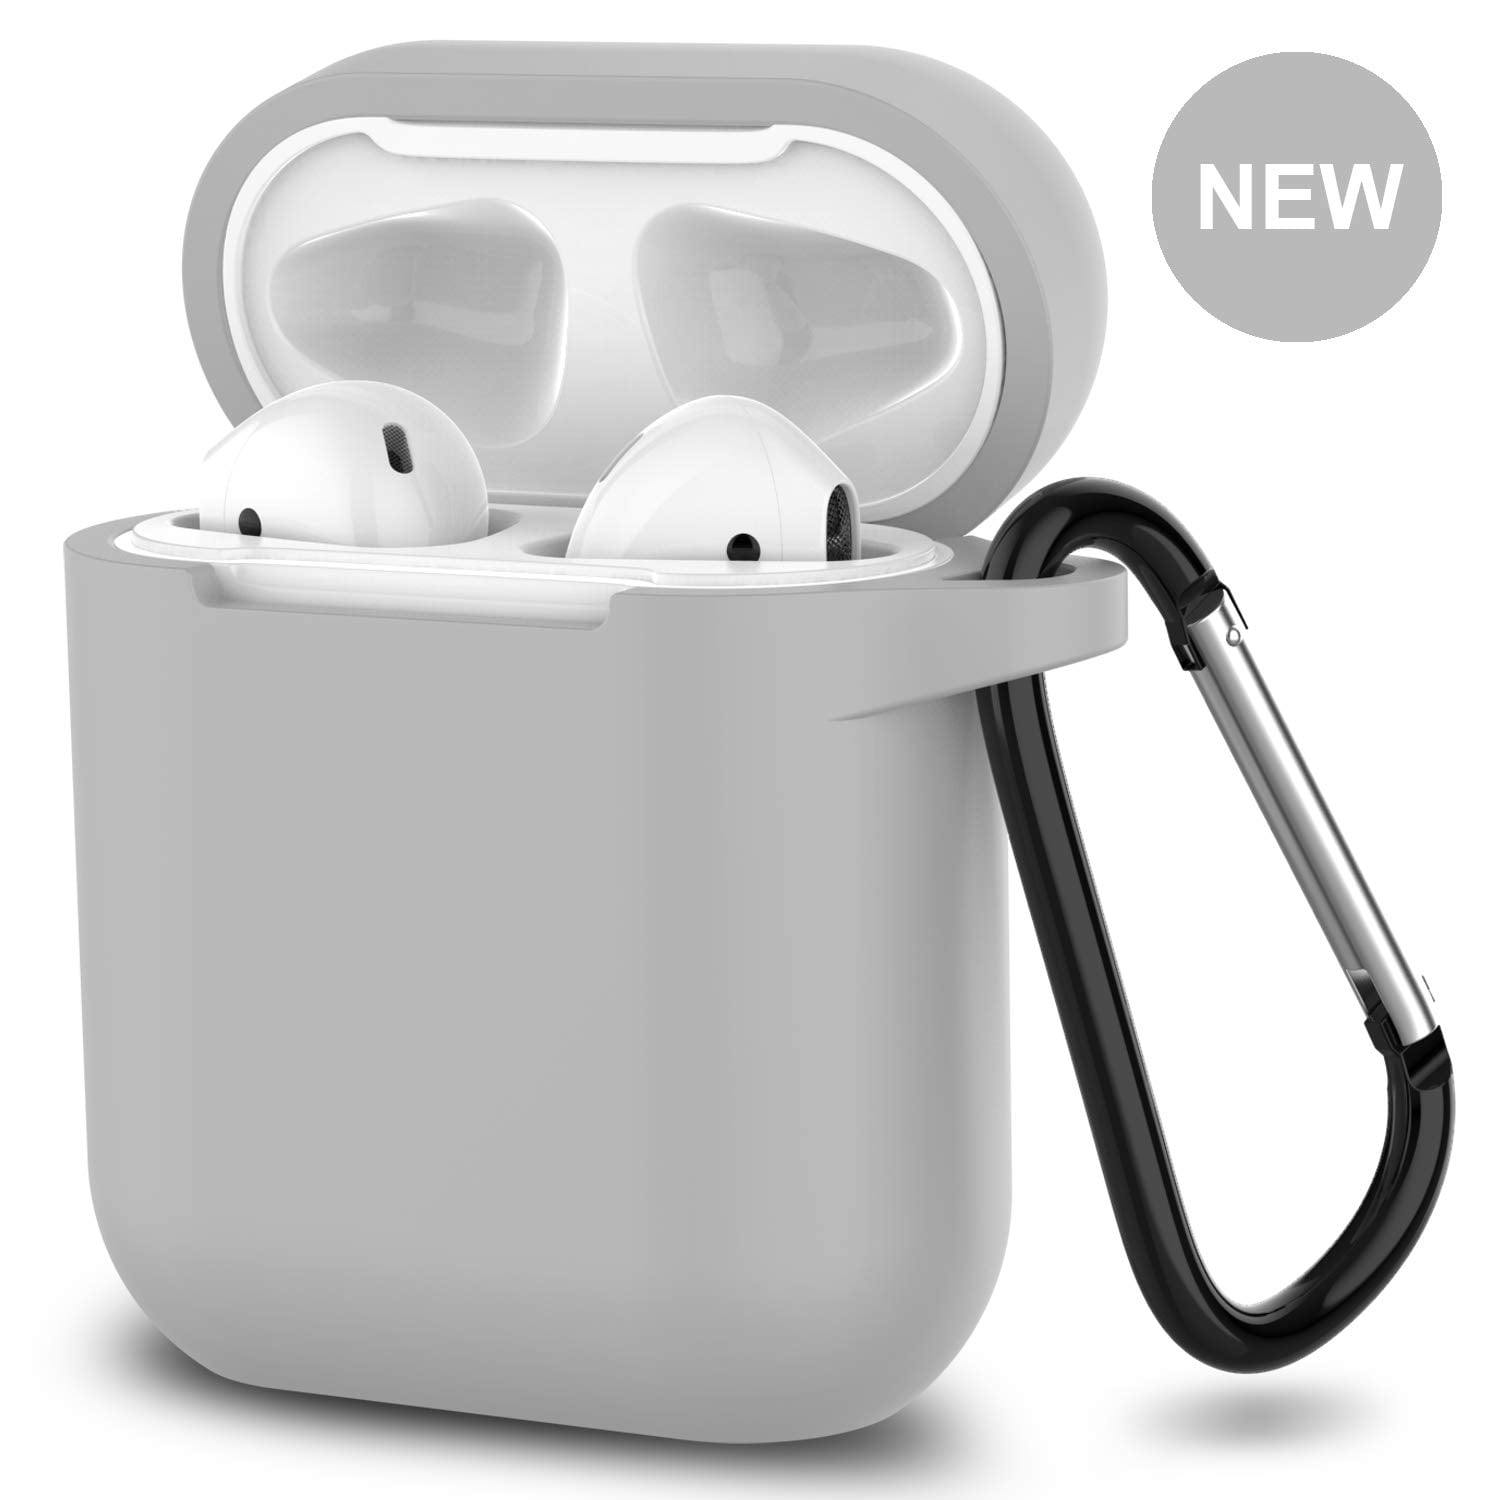 Not for Wireless Charging Case 2019 Newest AirPods Case,360°Protective Silicone AirPods Accessories Kit Compatiable with Apple AirPods 1st/2nd Charging Case